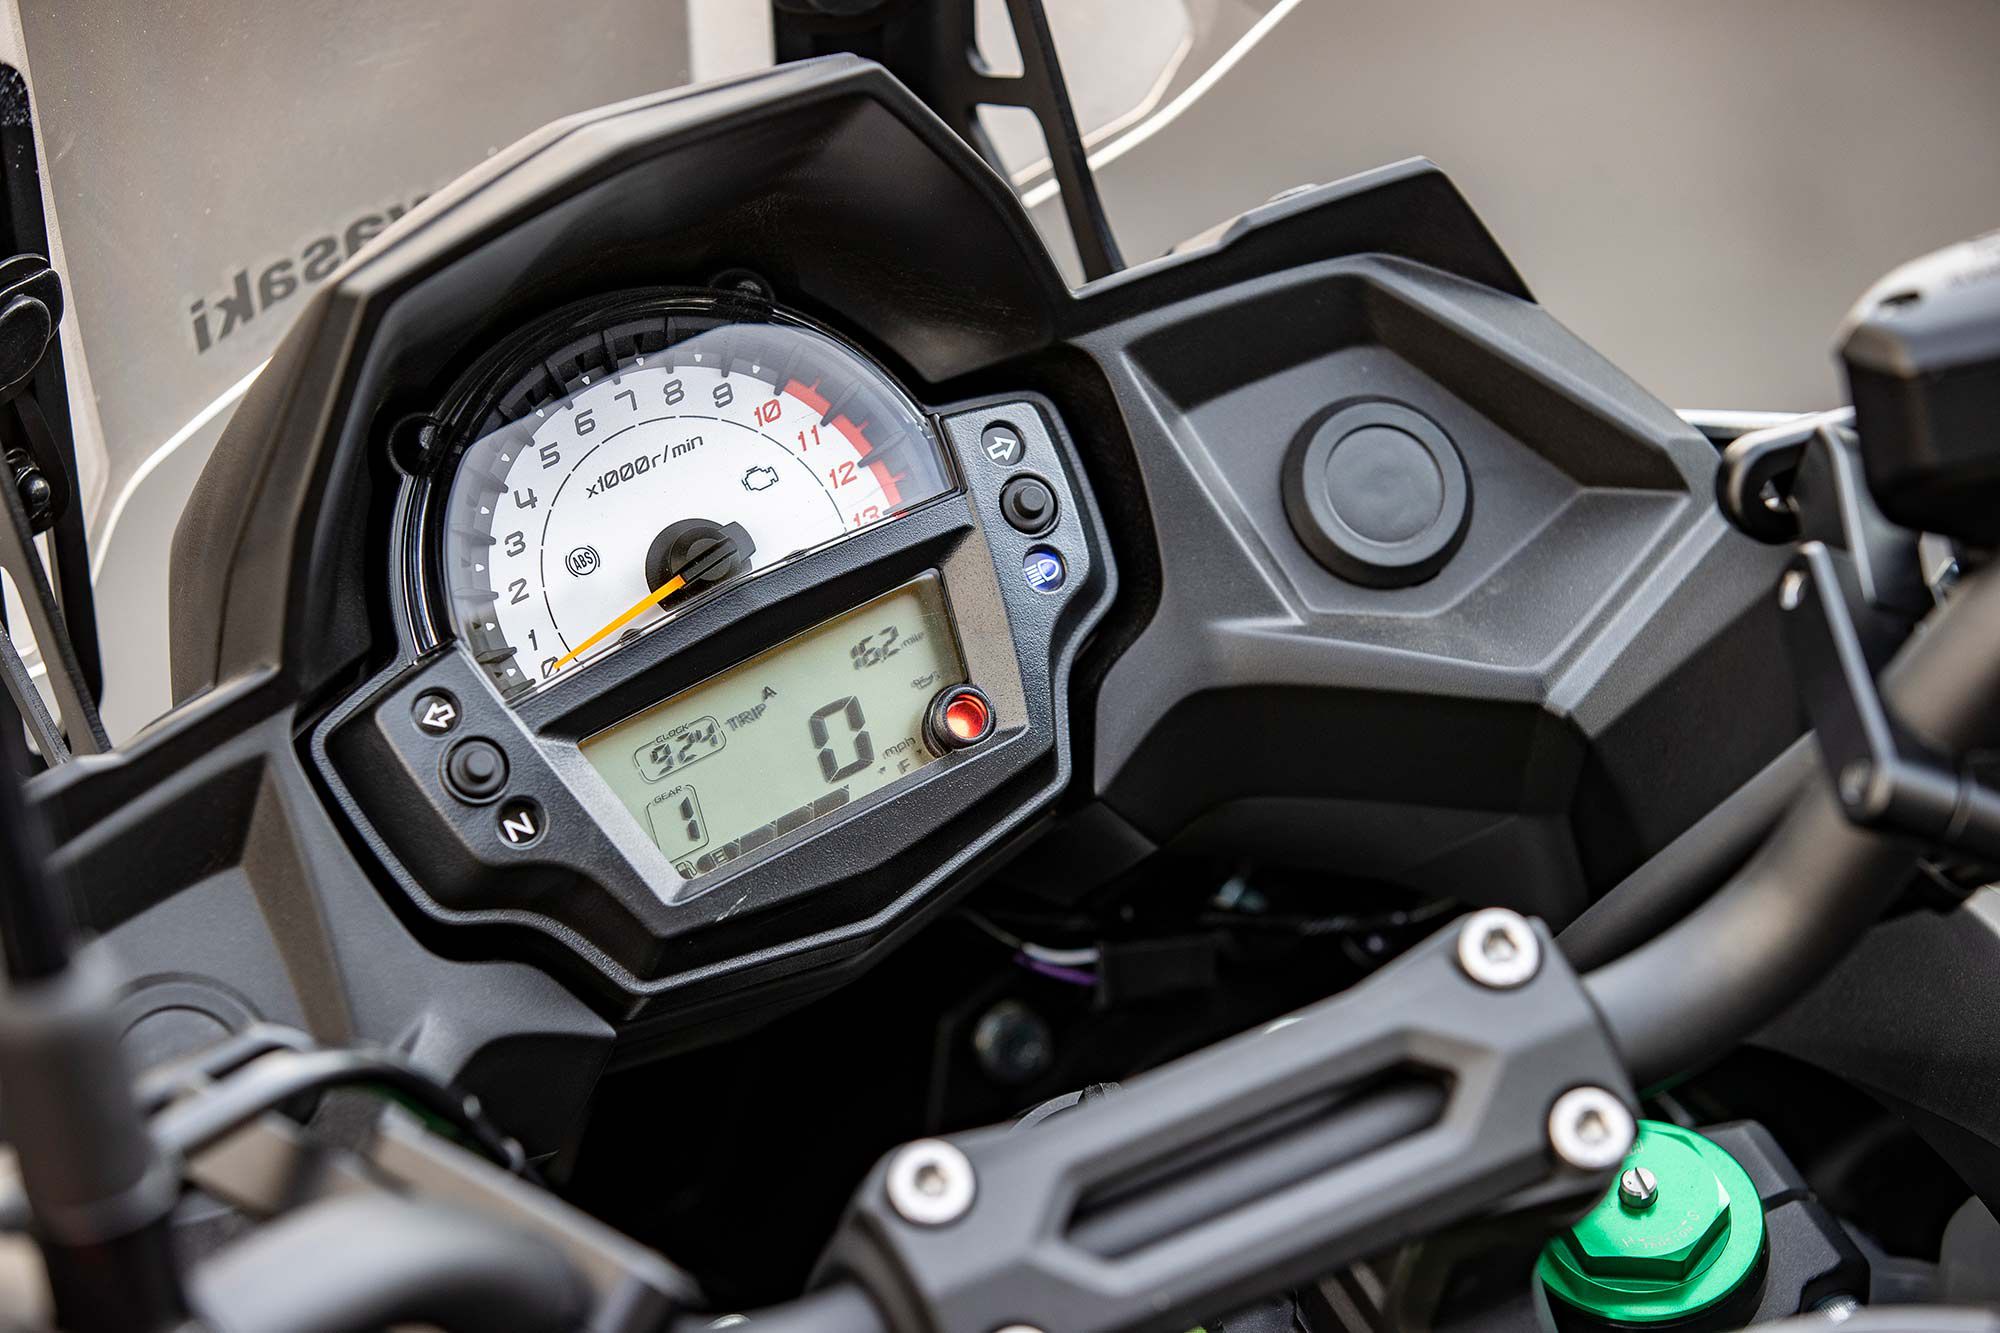 A simplistic dashboard with an LCD display and analog tachometer is fitted to the Versys 650 LT. In the modern age of TFT displays, it shows the Kawasaki has aged.